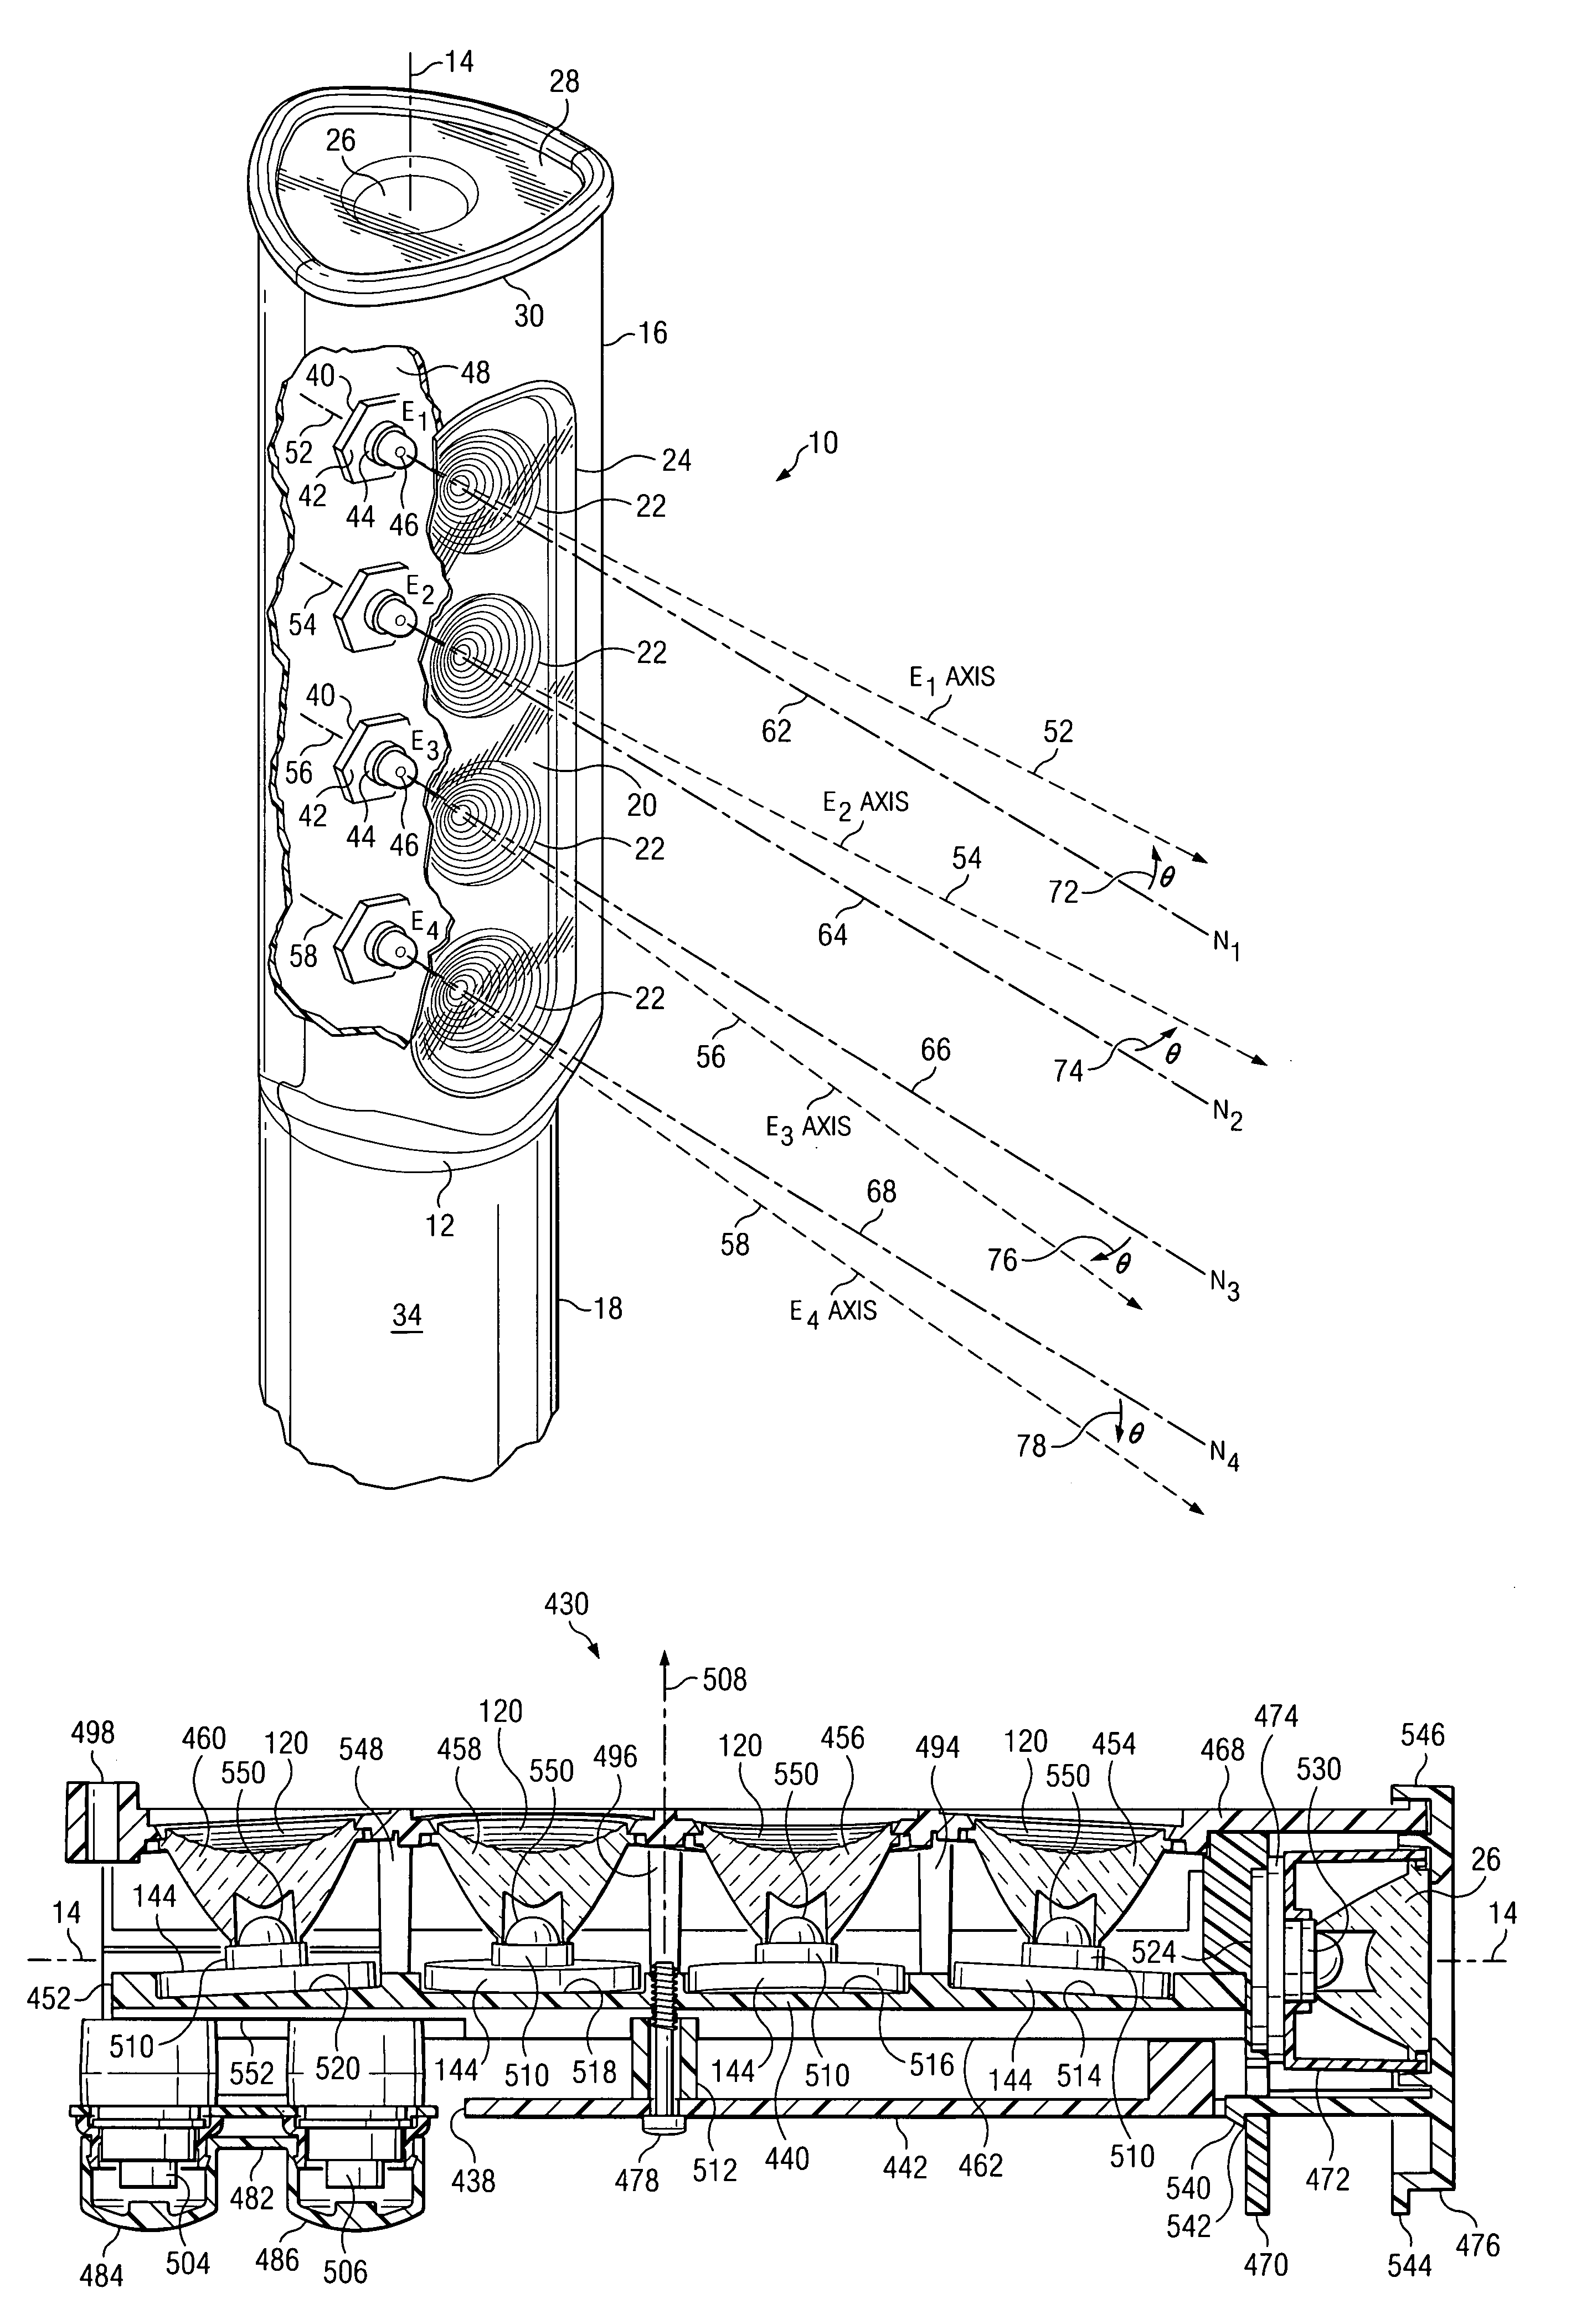 Lighting module assembly and method for a compact lighting device